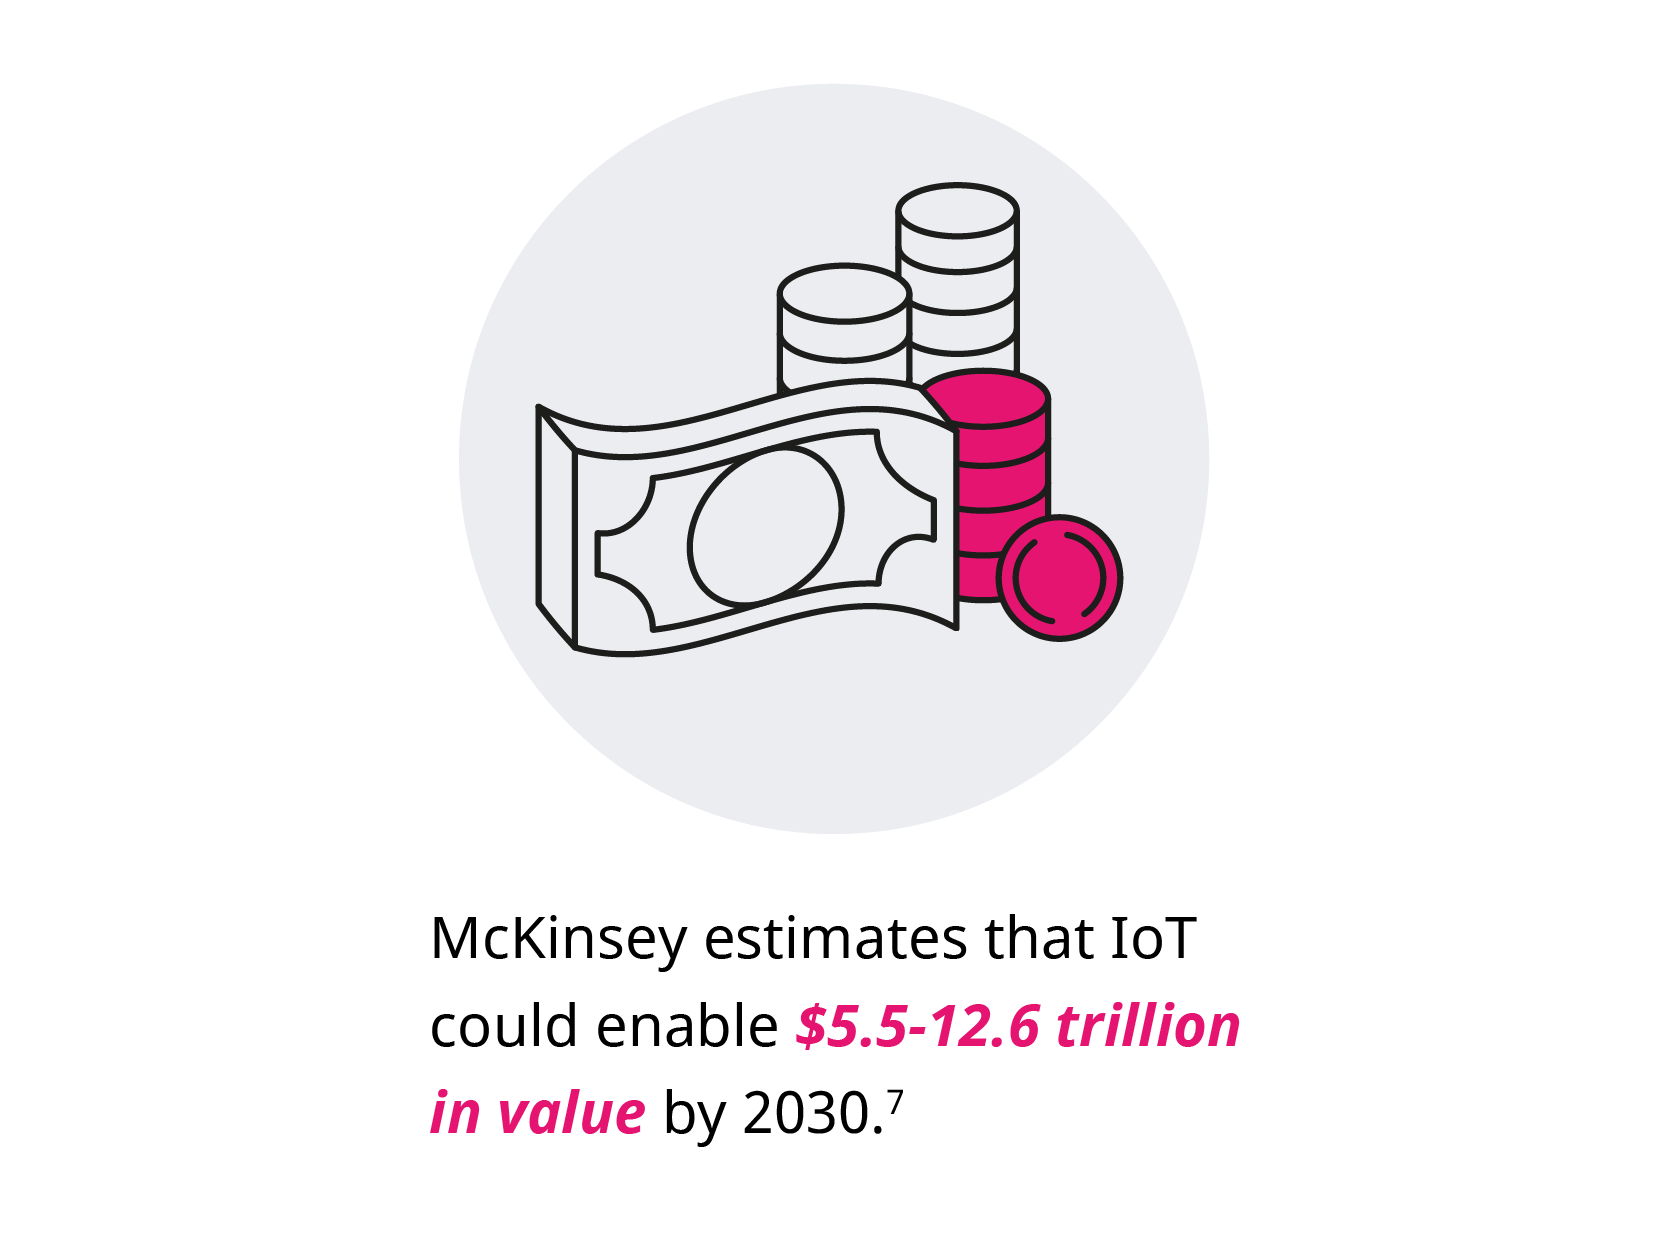 McKiinsey estimates that IoT could enable $5.5-12.6 trillion in value by 2030